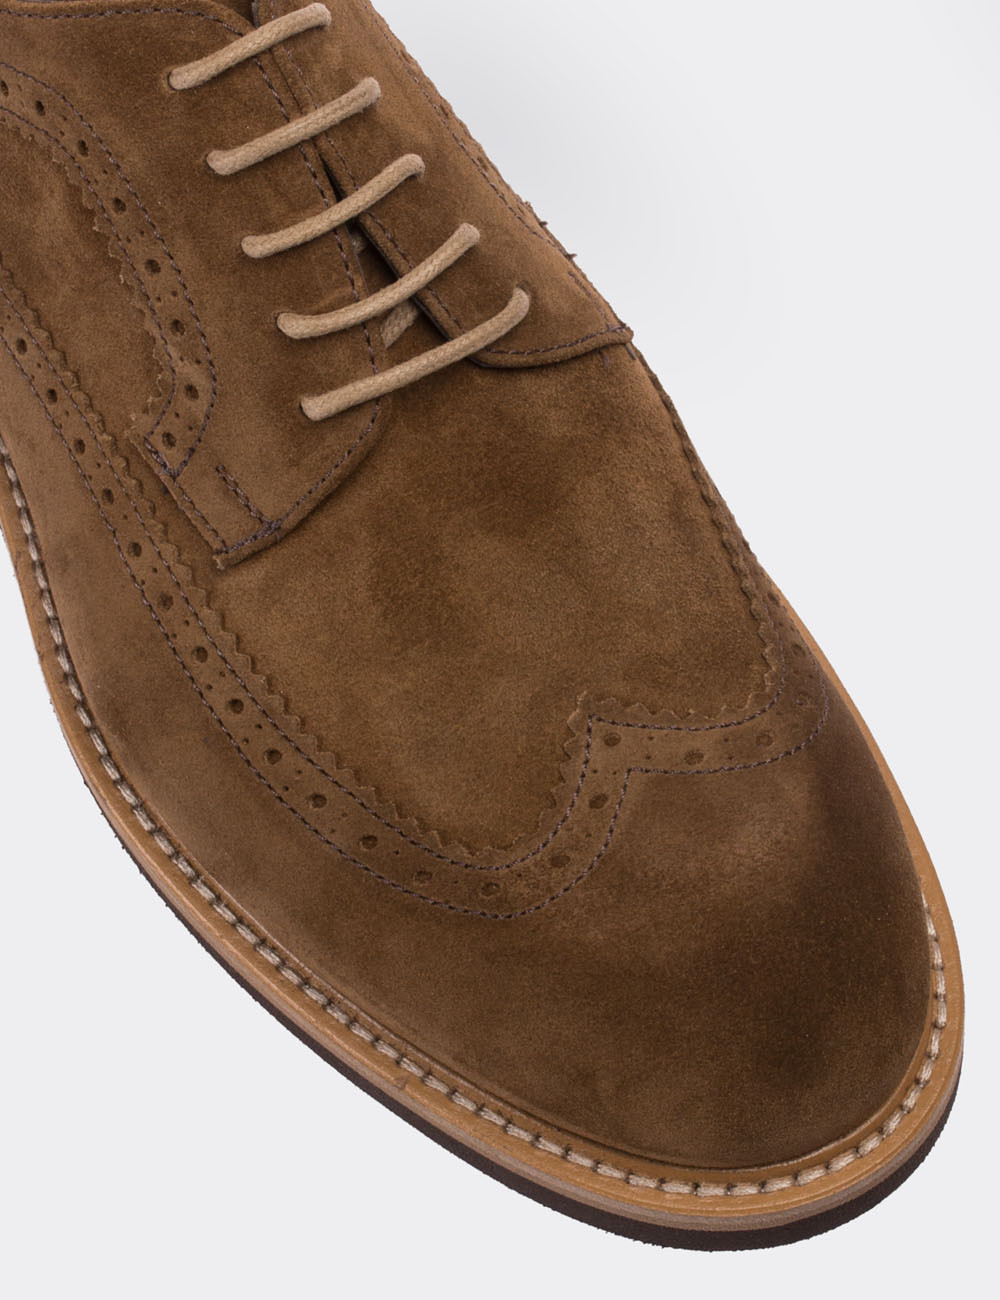 Brown Suede Leather Lace-up Shoes - 01293MKHVE19